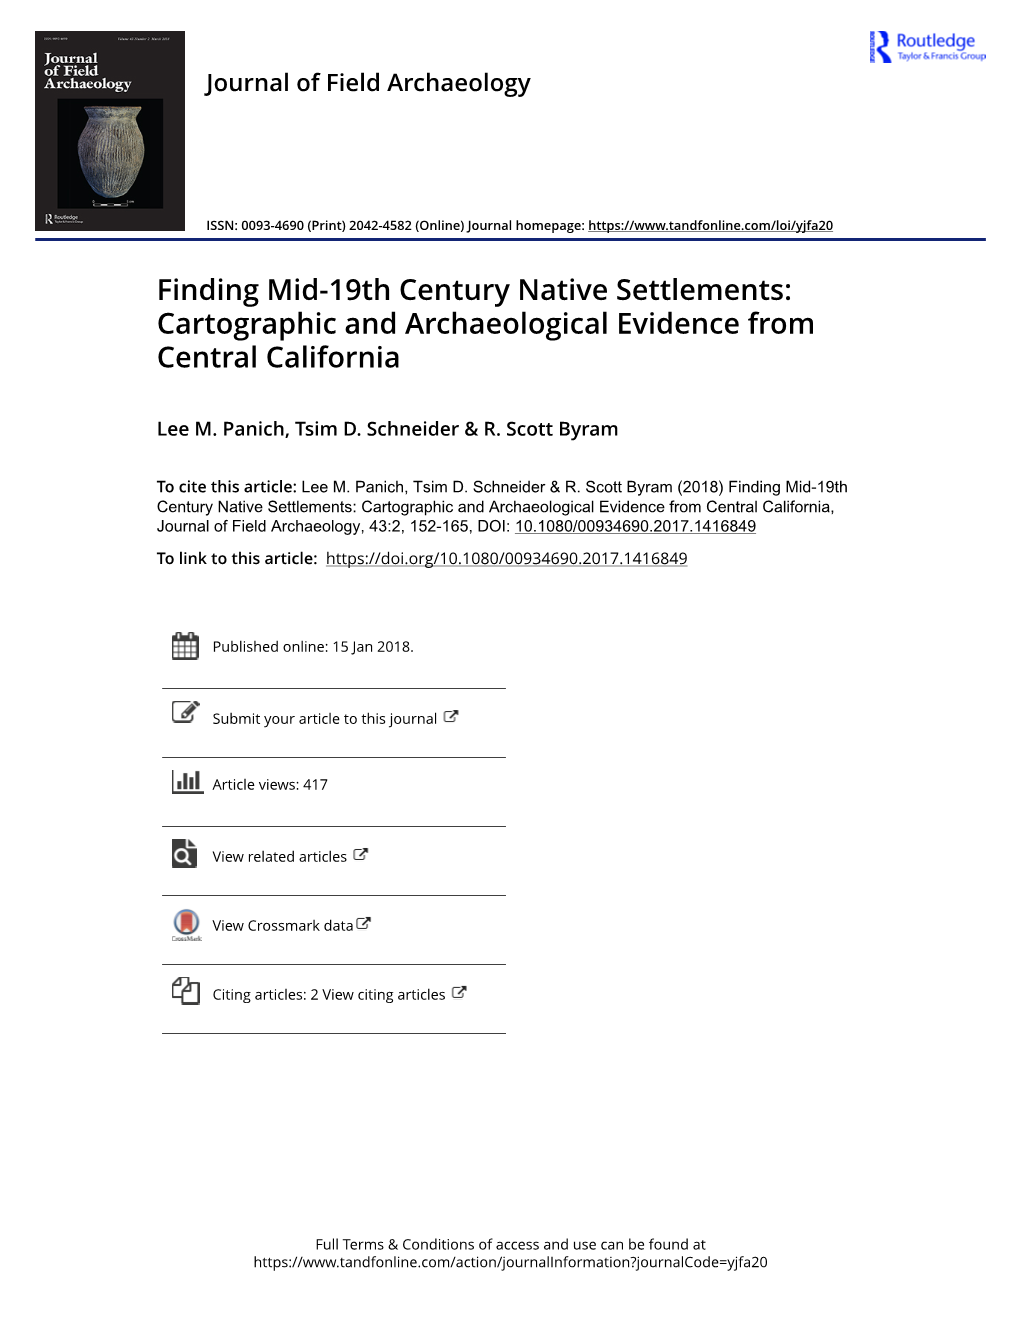 Finding Mid-19Th Century Native Settlements: Cartographic and Archaeological Evidence from Central California